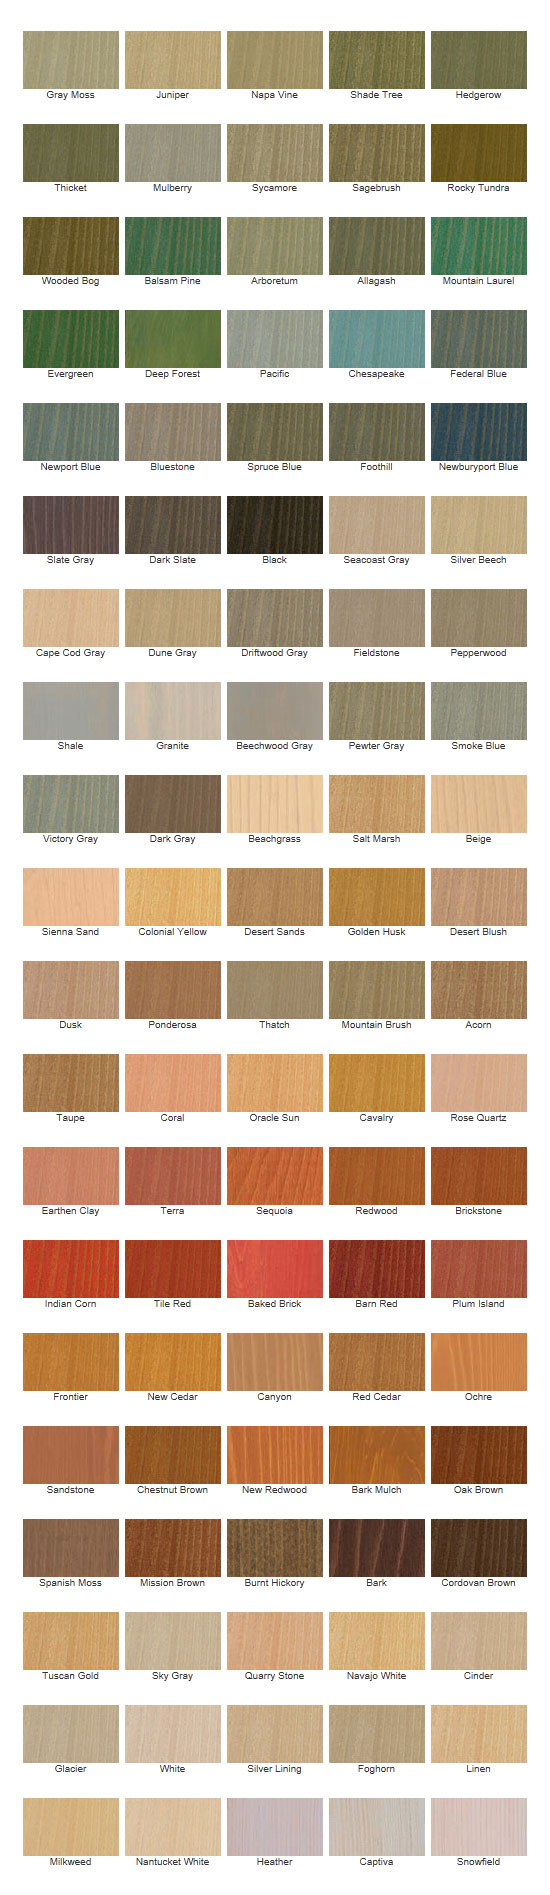 Exterior Deck Finishes Deck Stain Sikkens Cabot Olympic pertaining to size 550 X 1895